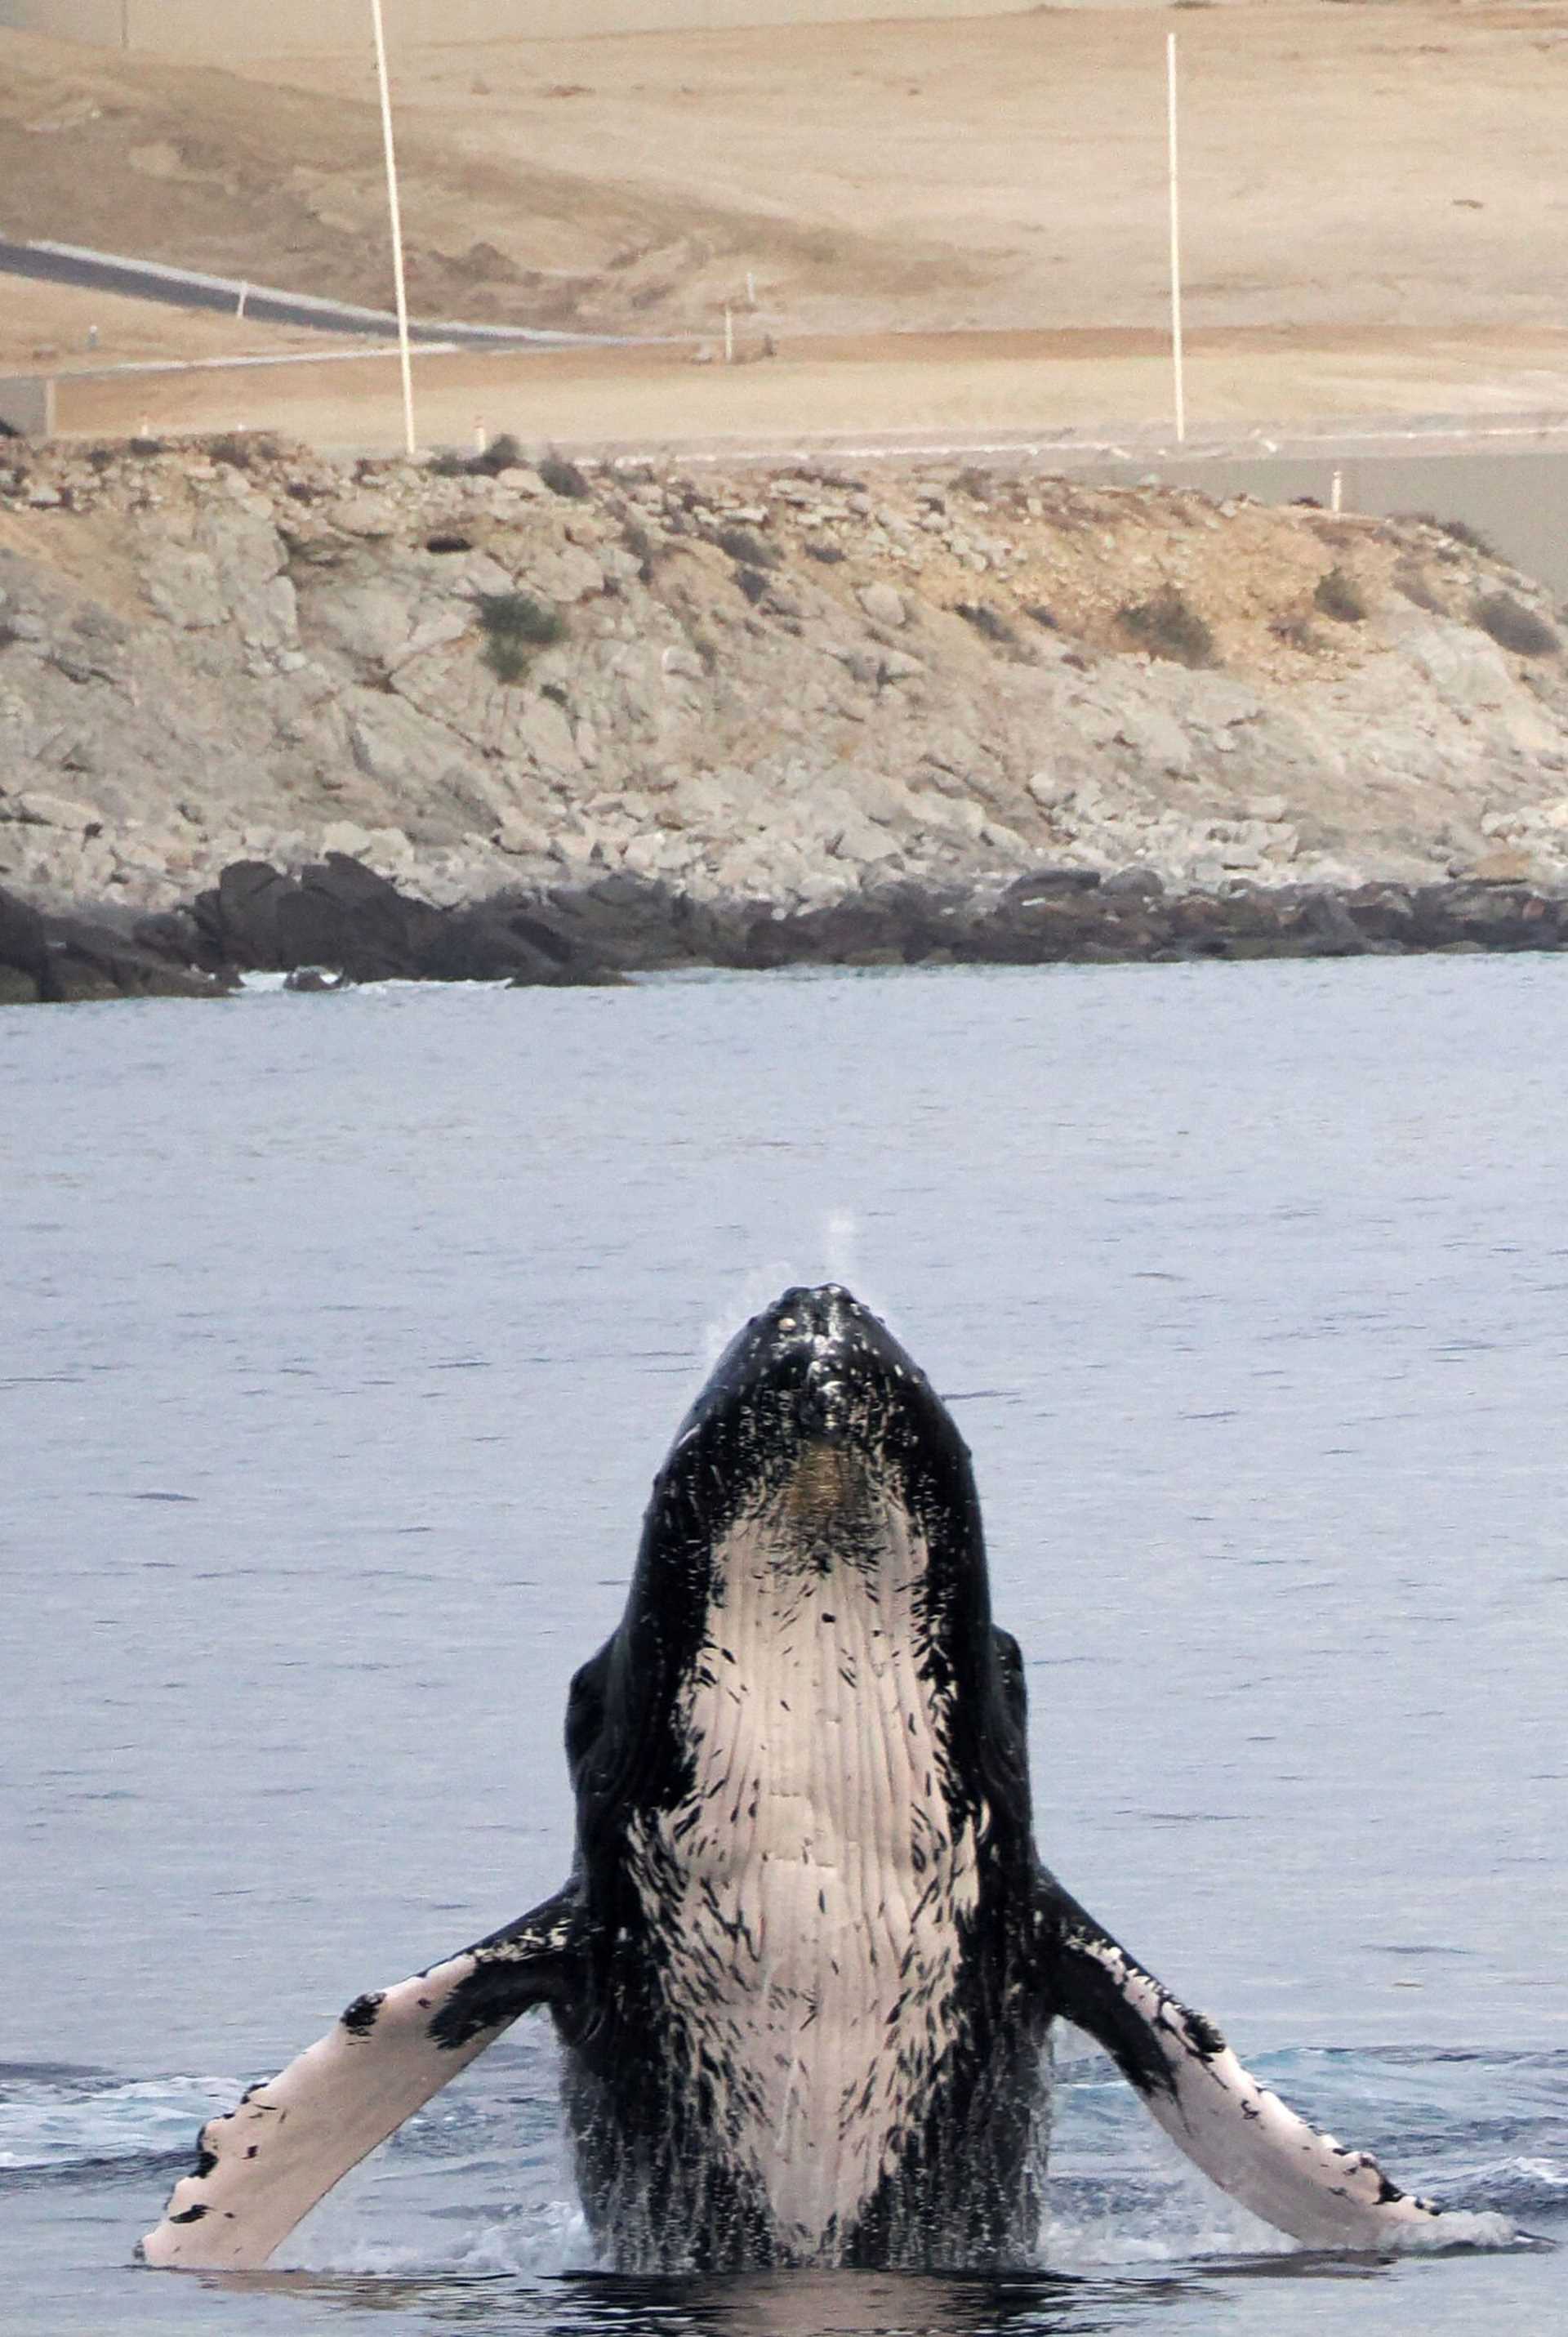 baby humpback whale almost entirely out of the water